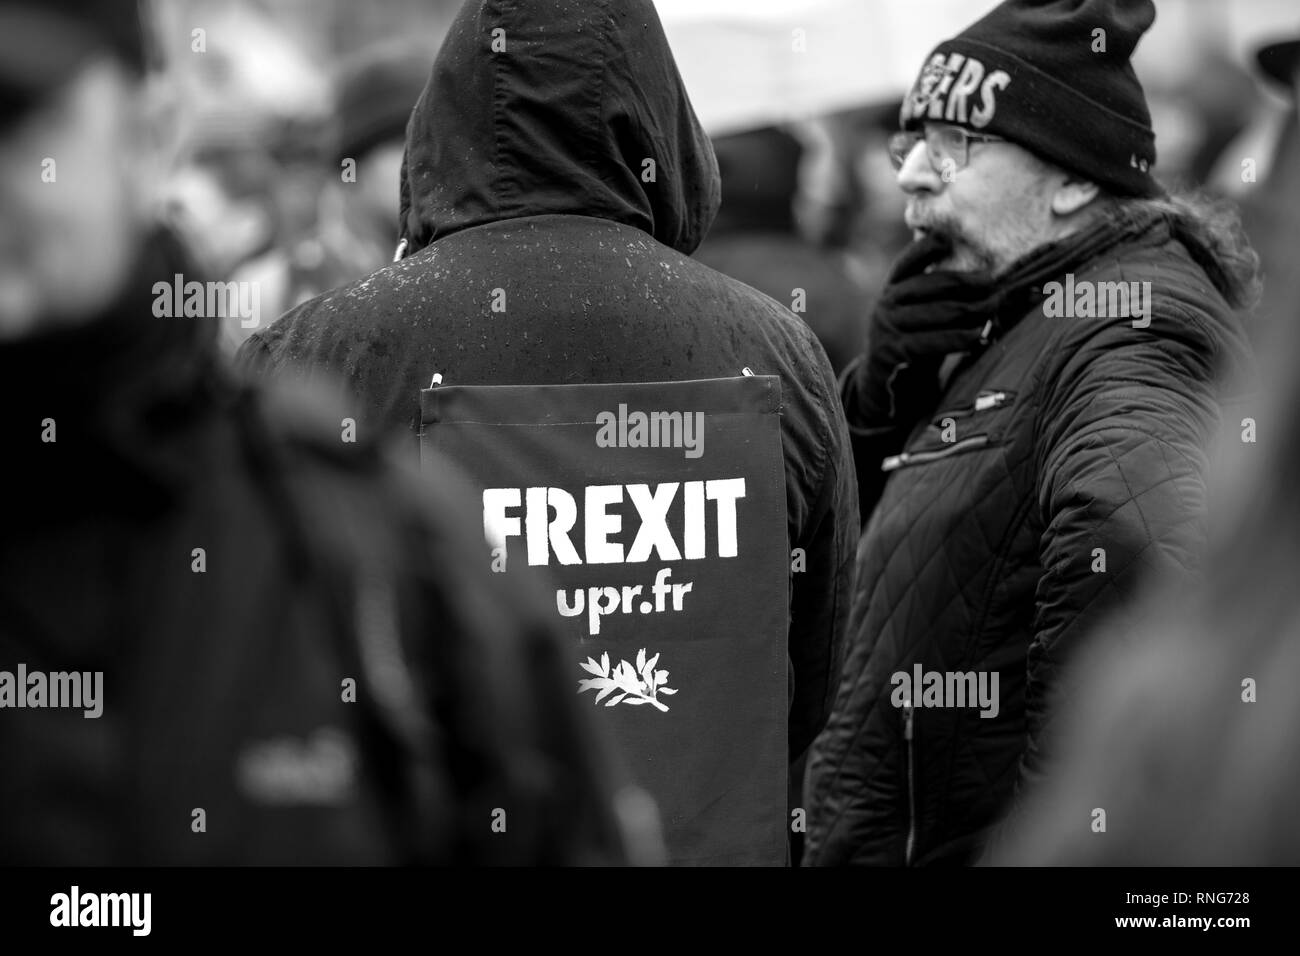 STRASBOURG, FRANCE - MAR 22, 2018: People gathering in Place Kleber square during CGT General Confederation of Labour demonstration protest against Macron French government string of reforms - man with Frexit sign on back of his jacket Stock Photo